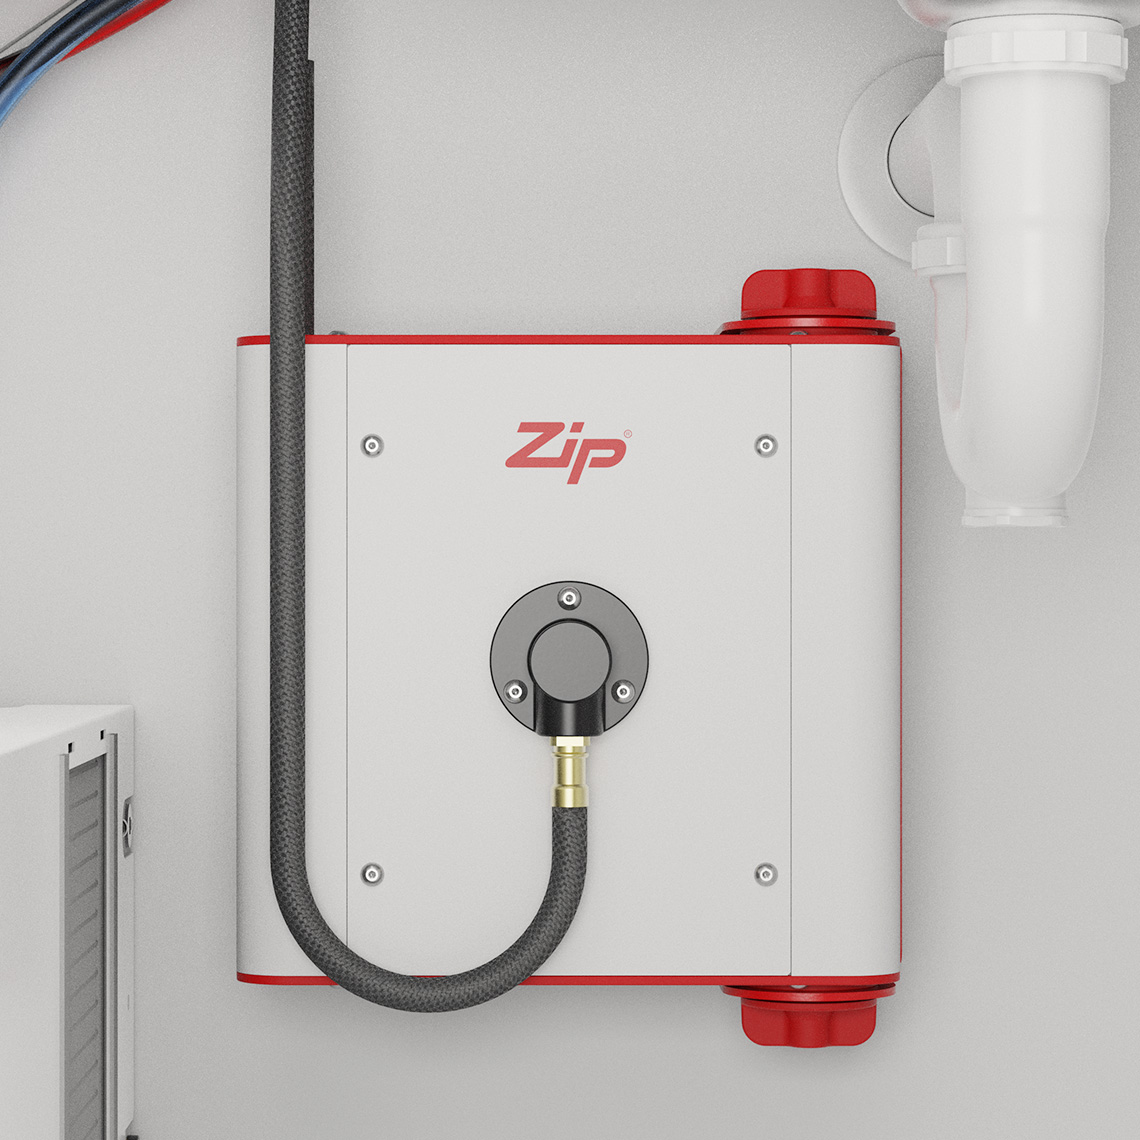 Zip Water Hose Management System | Product Development + Engineering Project Case Study